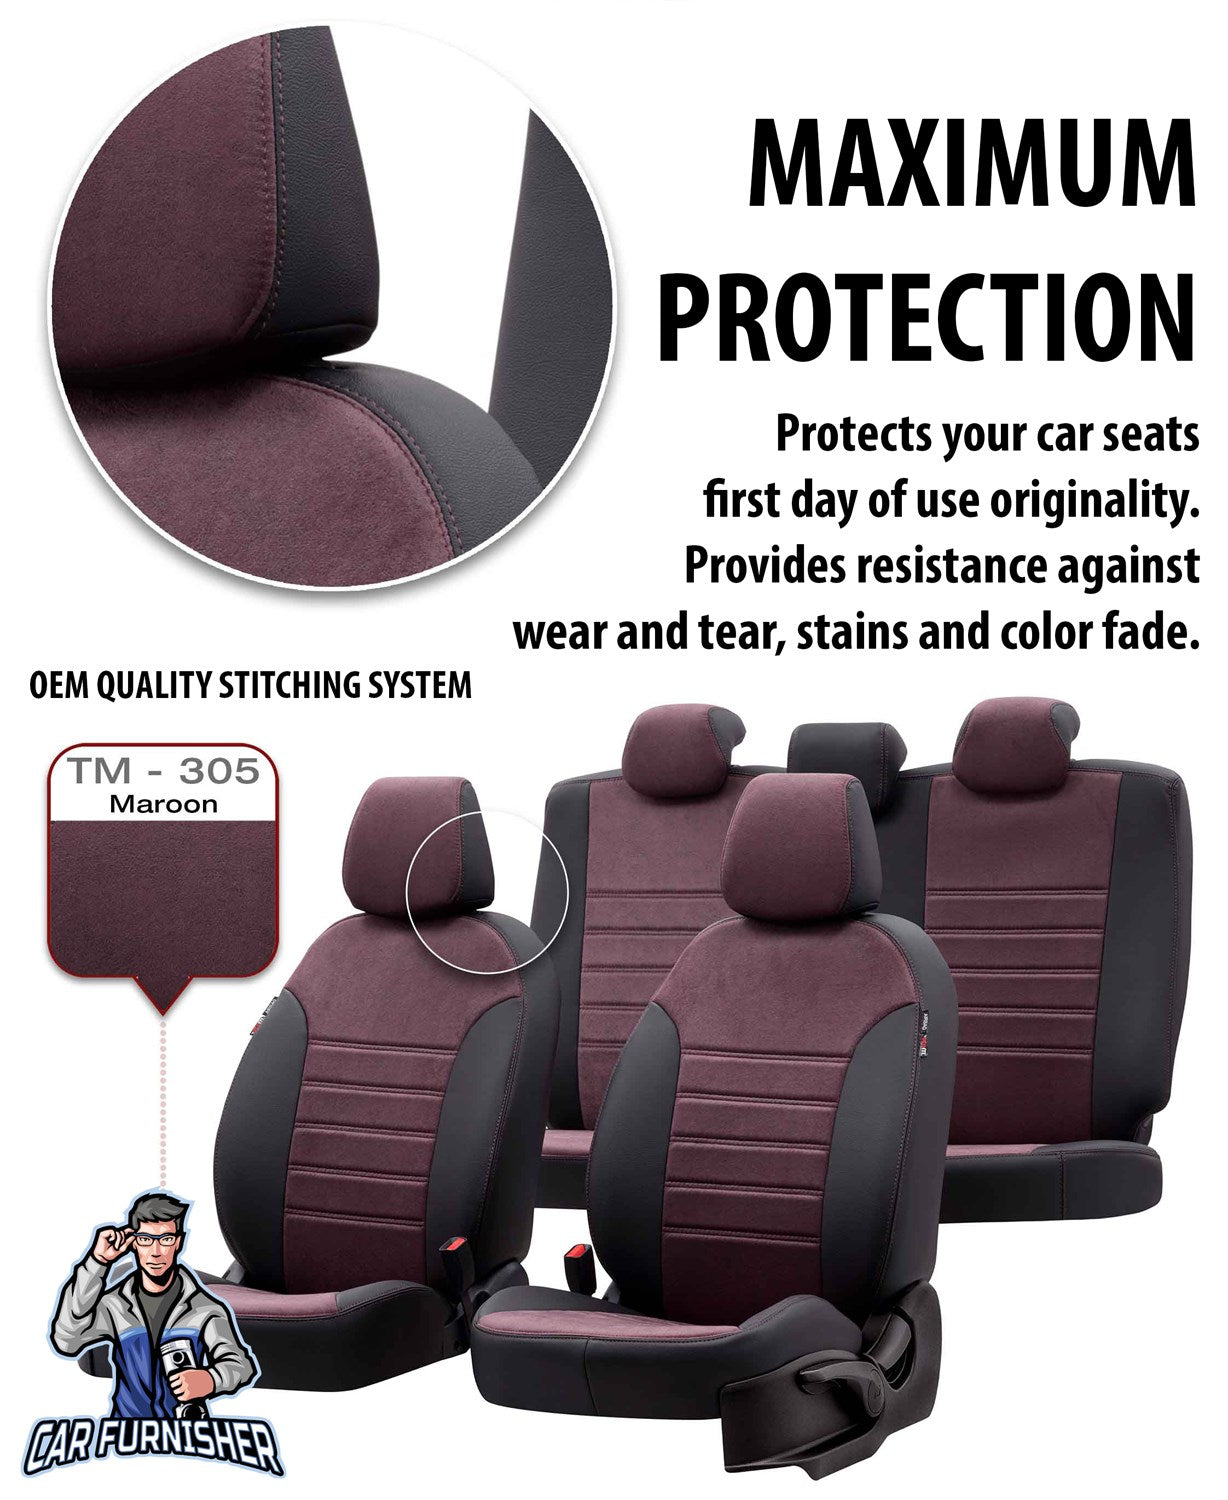 Renault 11 Seat Covers Milano Suede Design Burgundy Leather & Suede Fabric